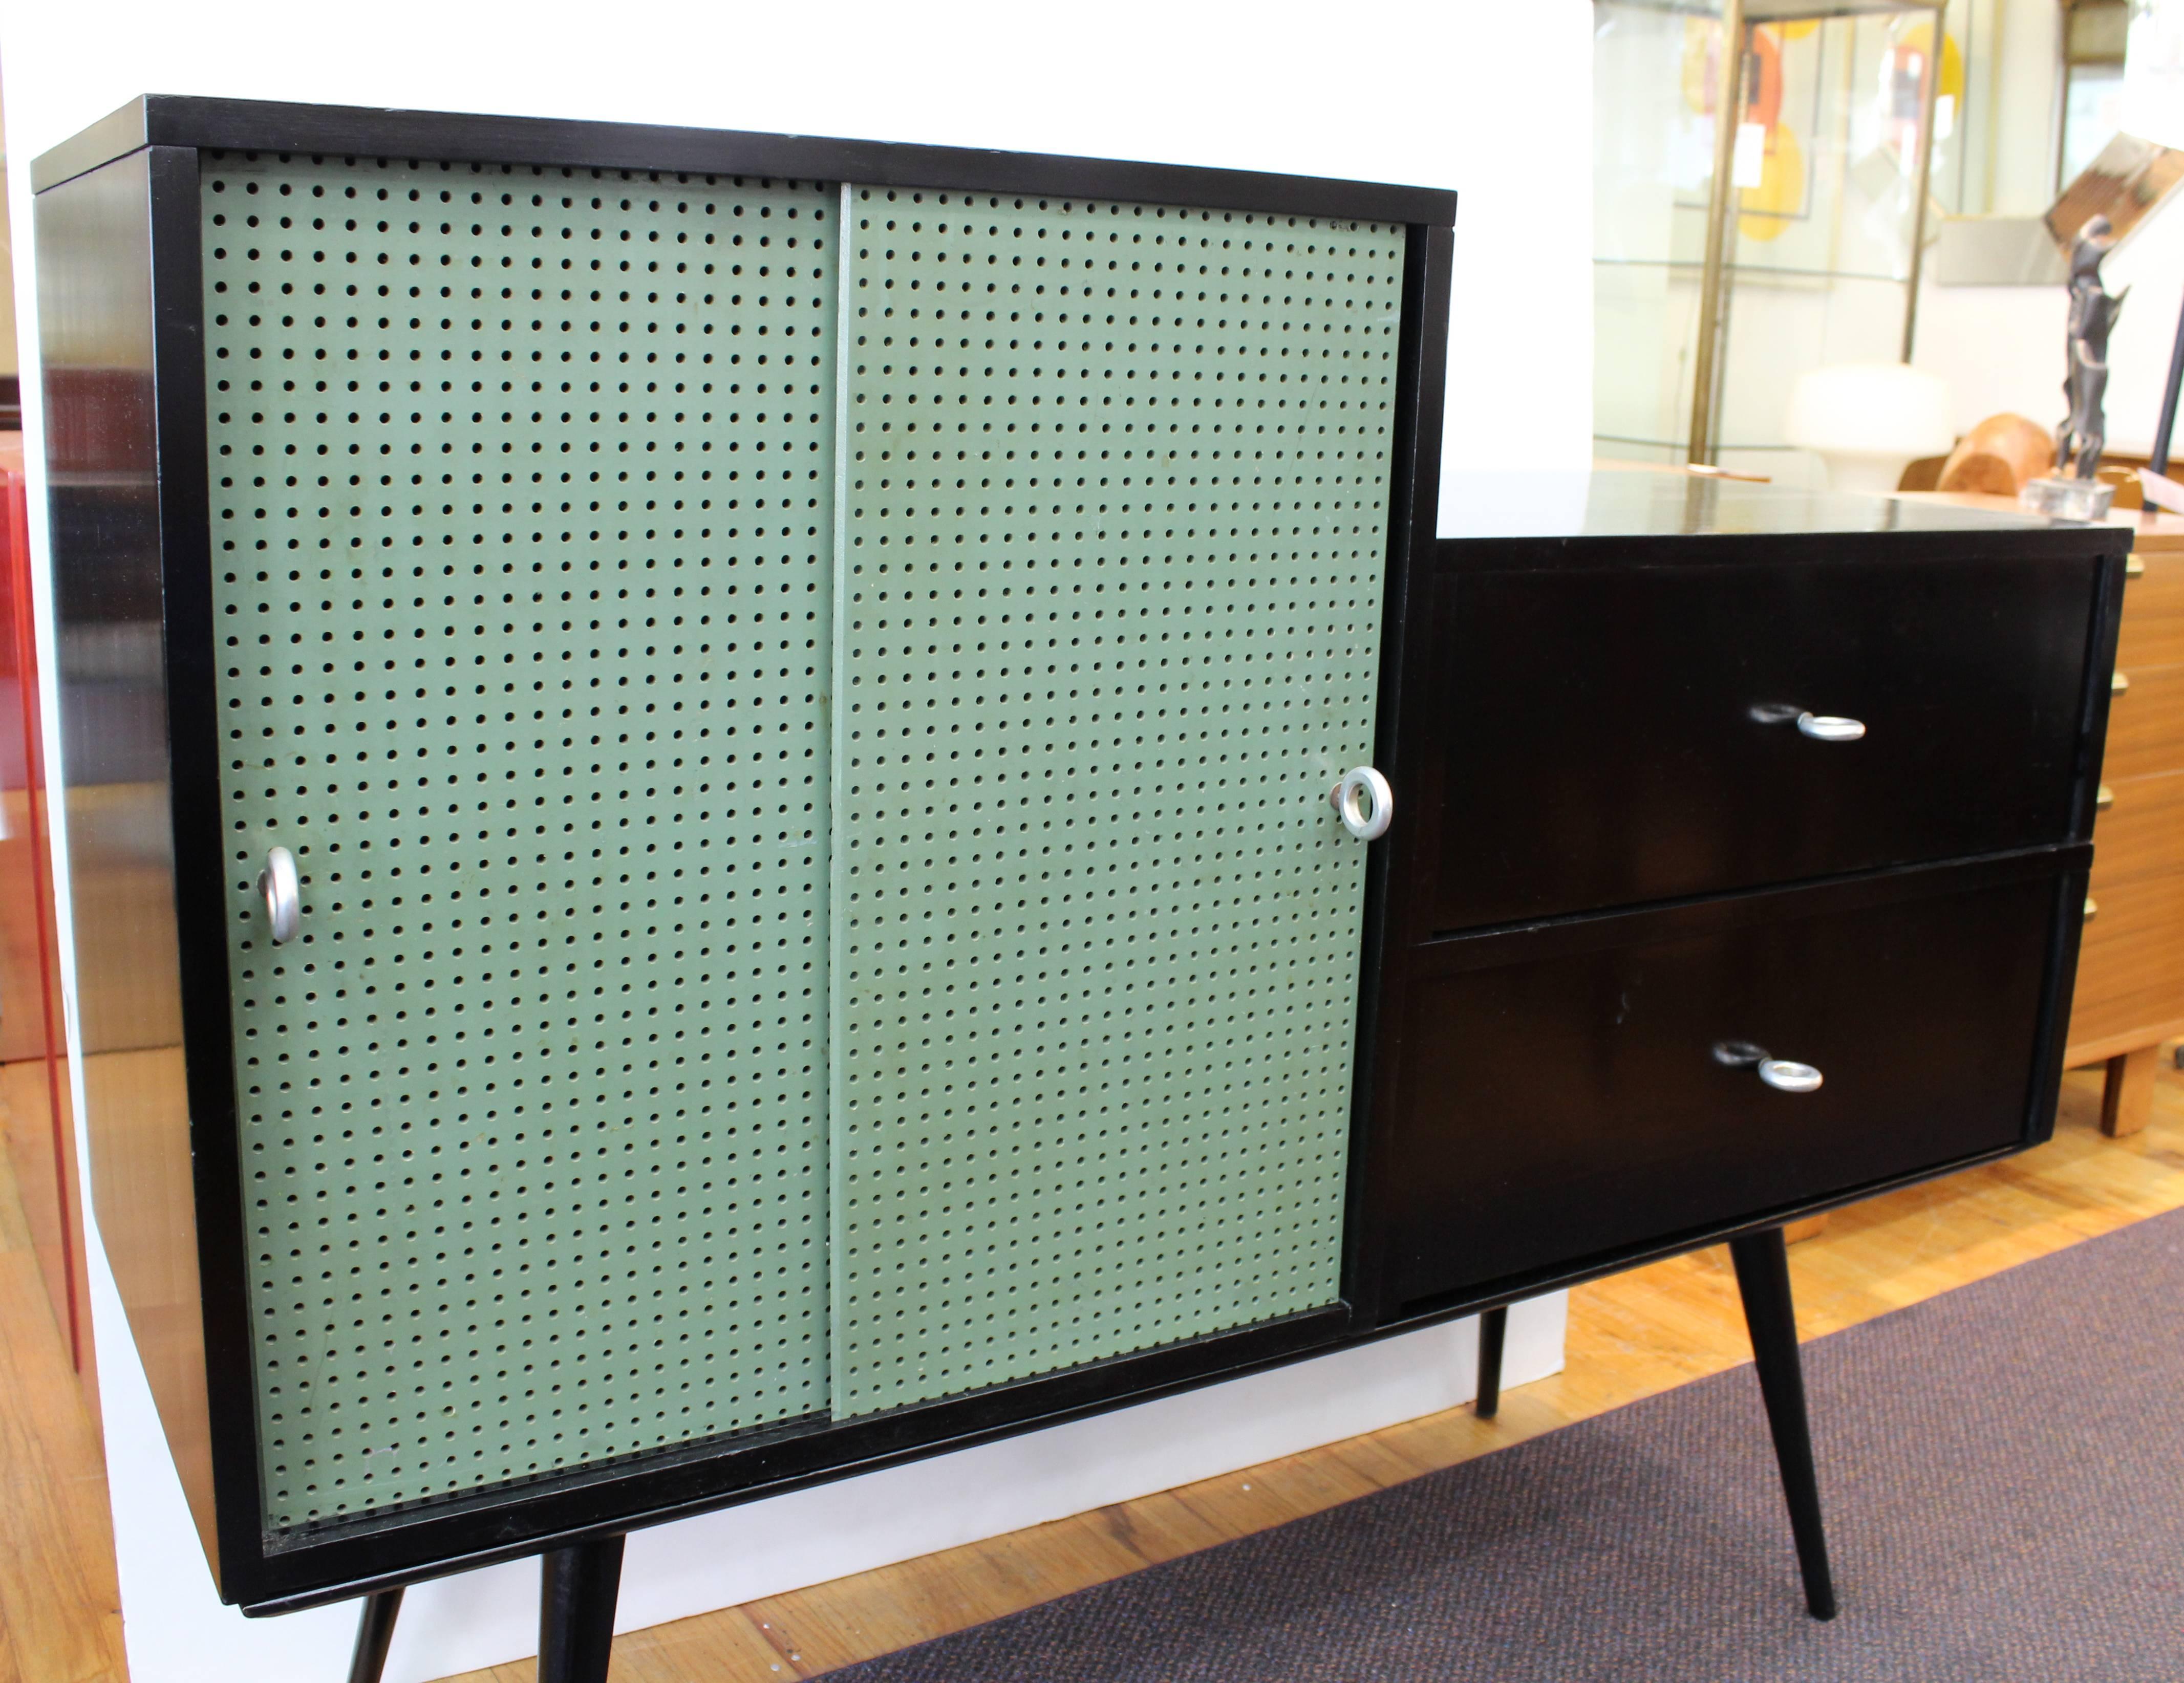 Mid-Century Modern Modular credenza or cabinet designed by American furniture and Industrial designer Paul McCobb (1917-1969) for the Winchendon Furniture Company in the 1950s. The piece is part of the Planner Group Series and has three moving